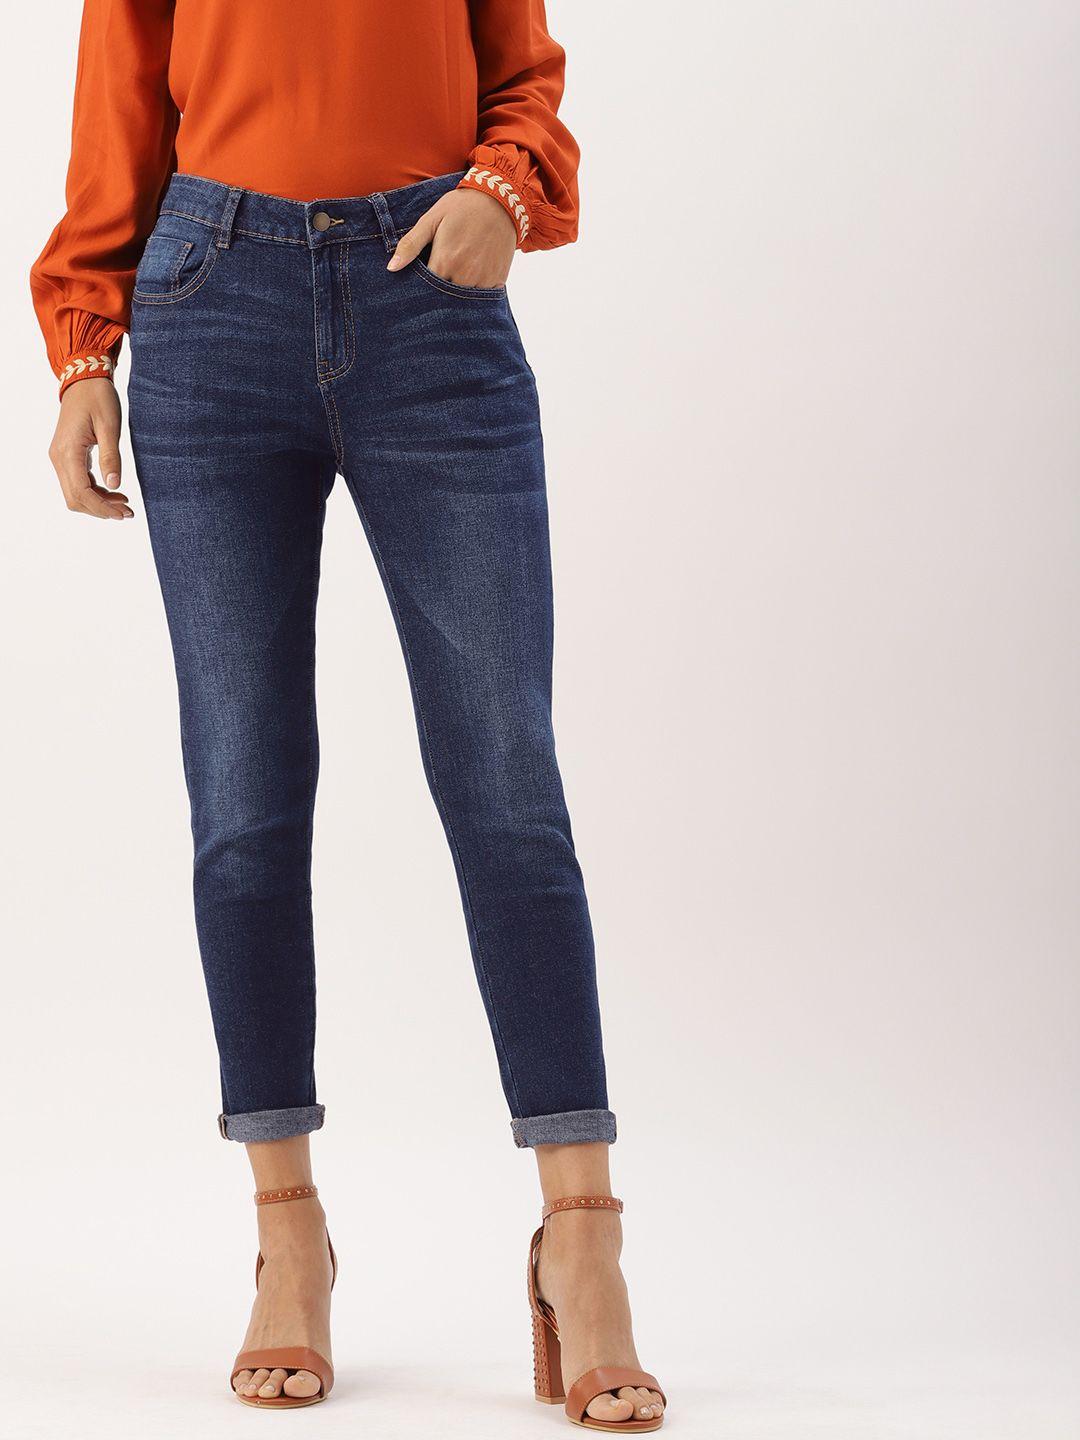 dressberry-women-blue-skinny-fit-mid-rise-clean-look-stretchable-jeans